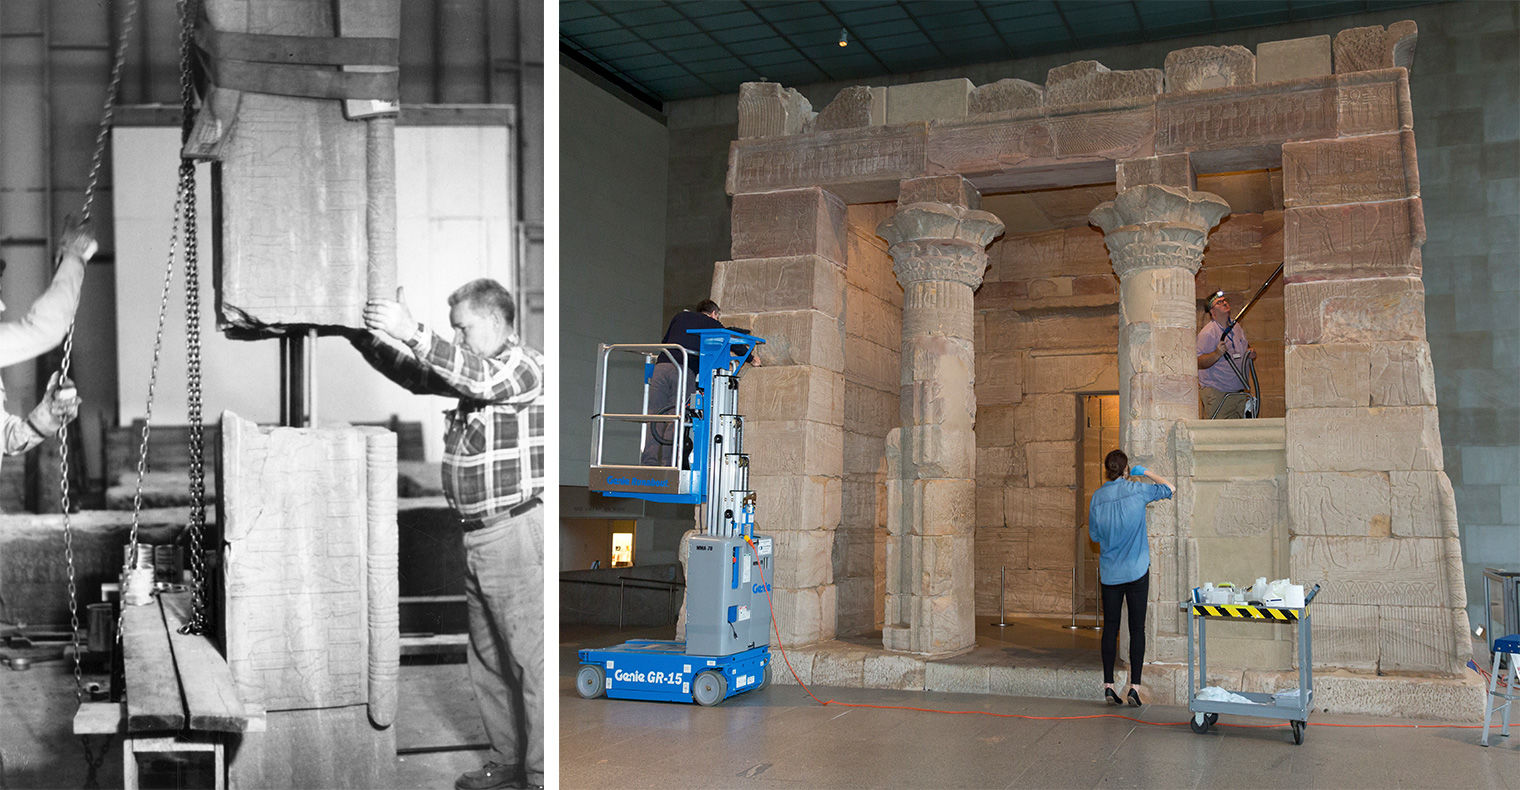 A composite image, on the left is a black and white photograph showing two men joining fragments of a block from the Temple of Dendur. On the right, a woman with dark hair wearing a light blue top, black pants, and blue plastic gloves cleans the temple's column while a man is elevated inside the temple cleaning the interior.